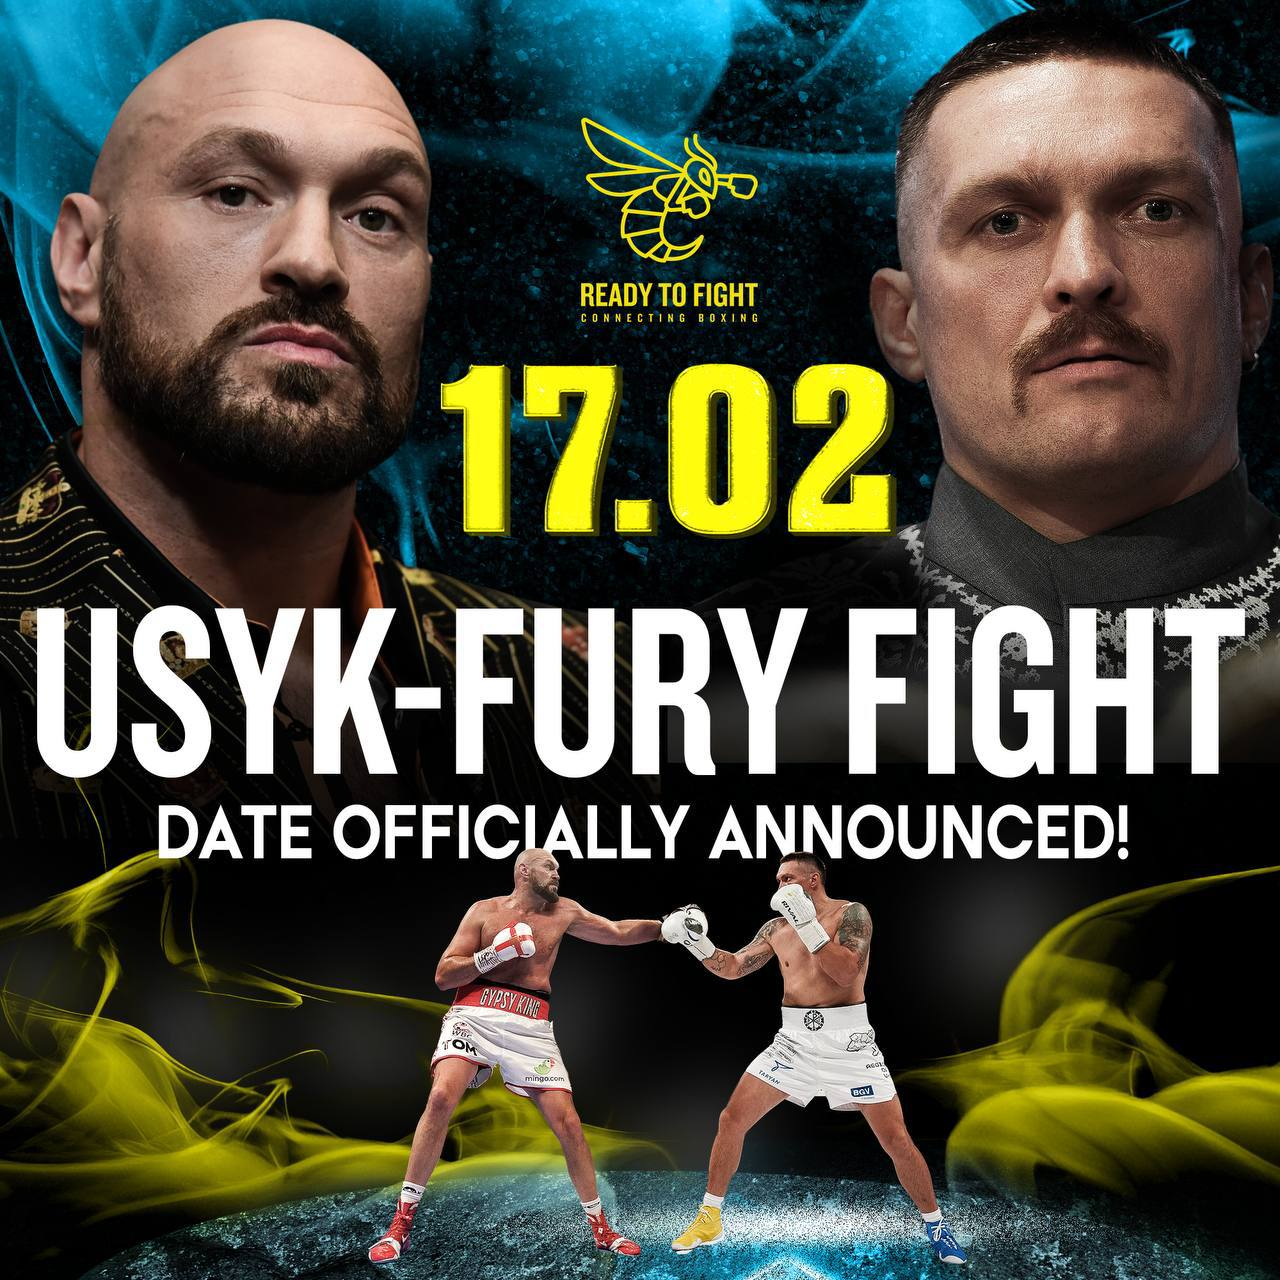 Usyk-Fury fight to take place in February